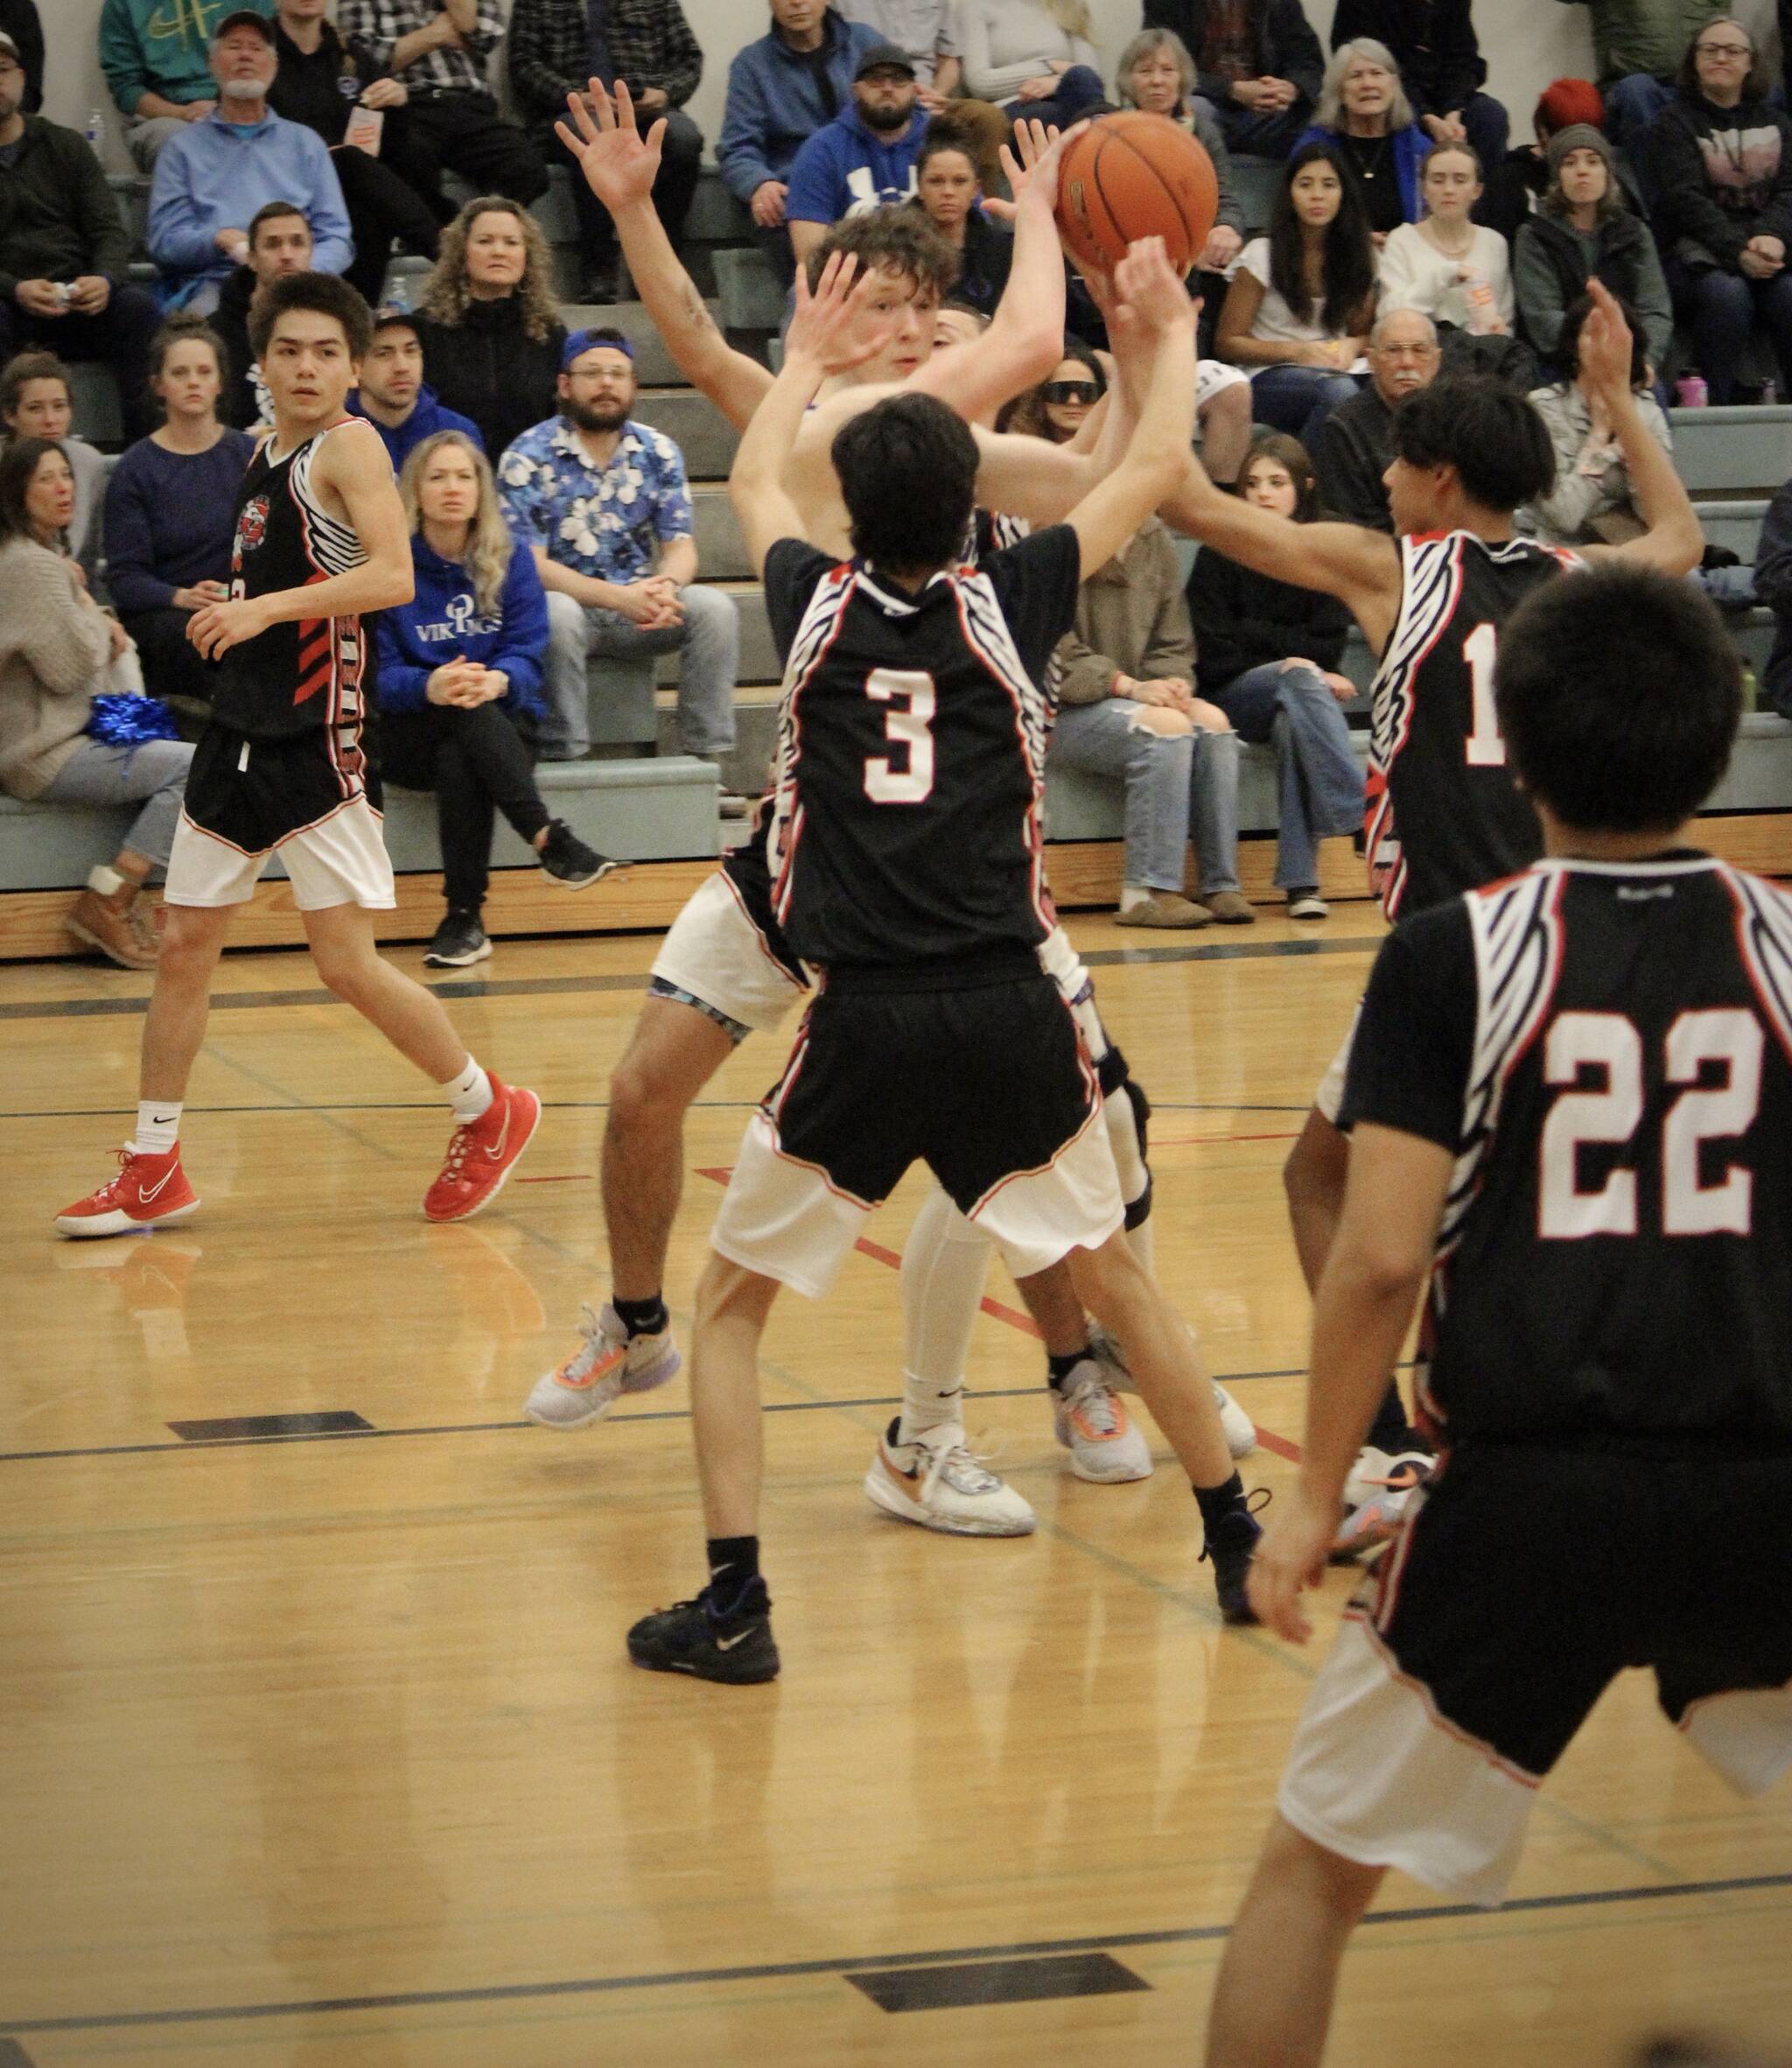 Corey Wiscomb photo. Aidan Murray draws multiple defenders on him and looks to pass in the game against the Heritage Hawks. Murray led the Vikings in scoring with 20 points.